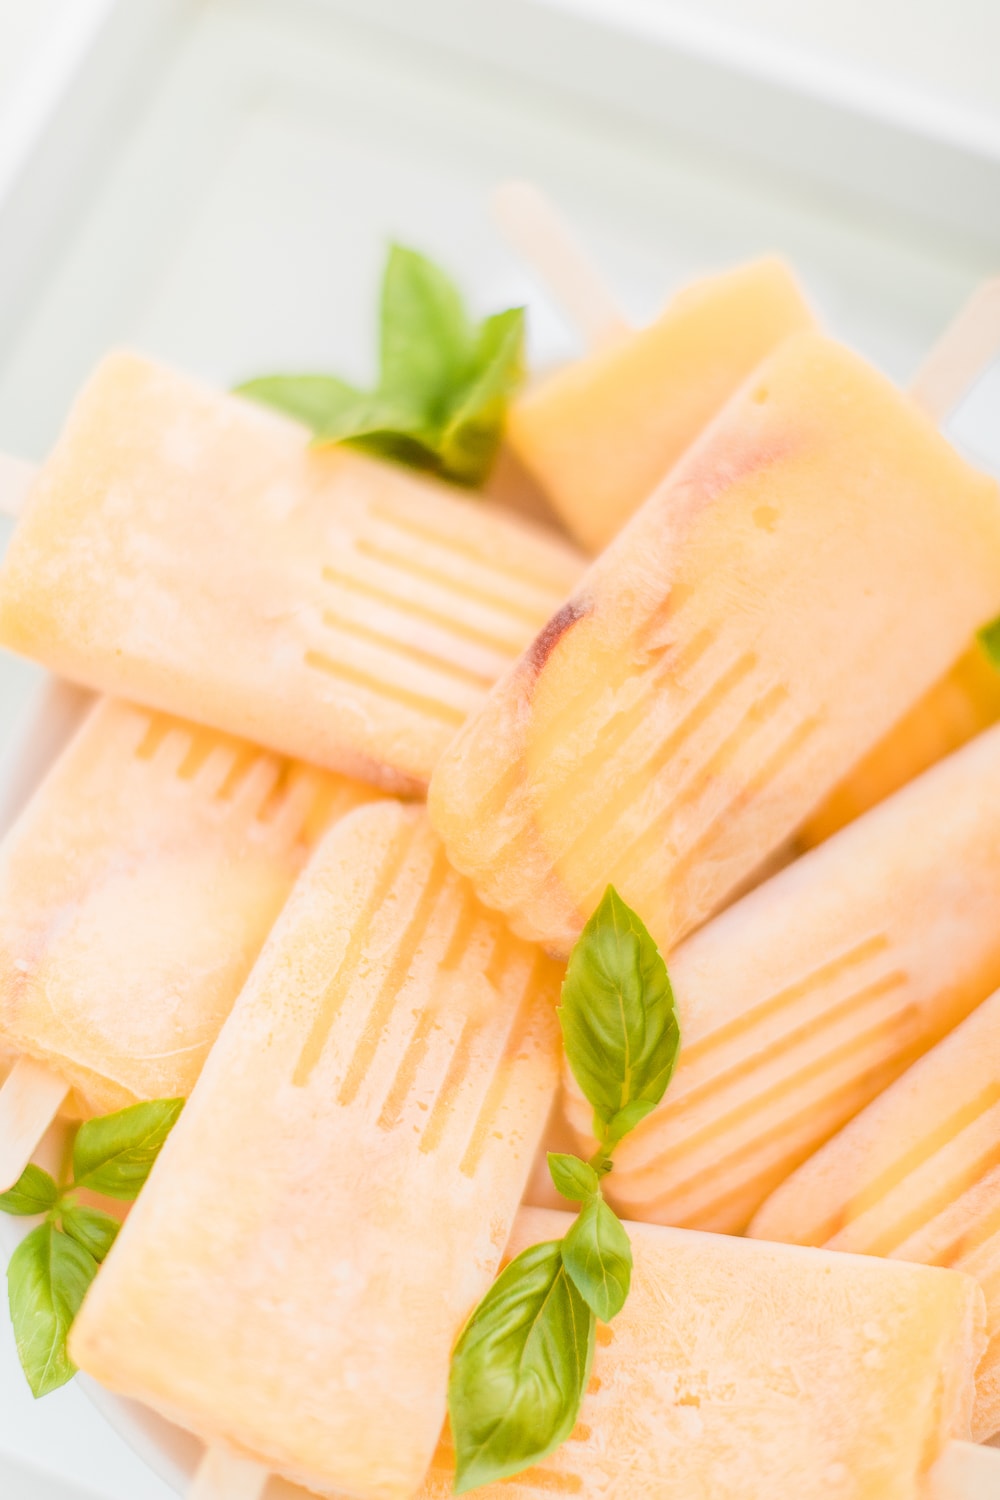 Southern lifestyle blogger Stephanie Ziajka shares her recipe for bellini popsicles on Diary of a Debutante